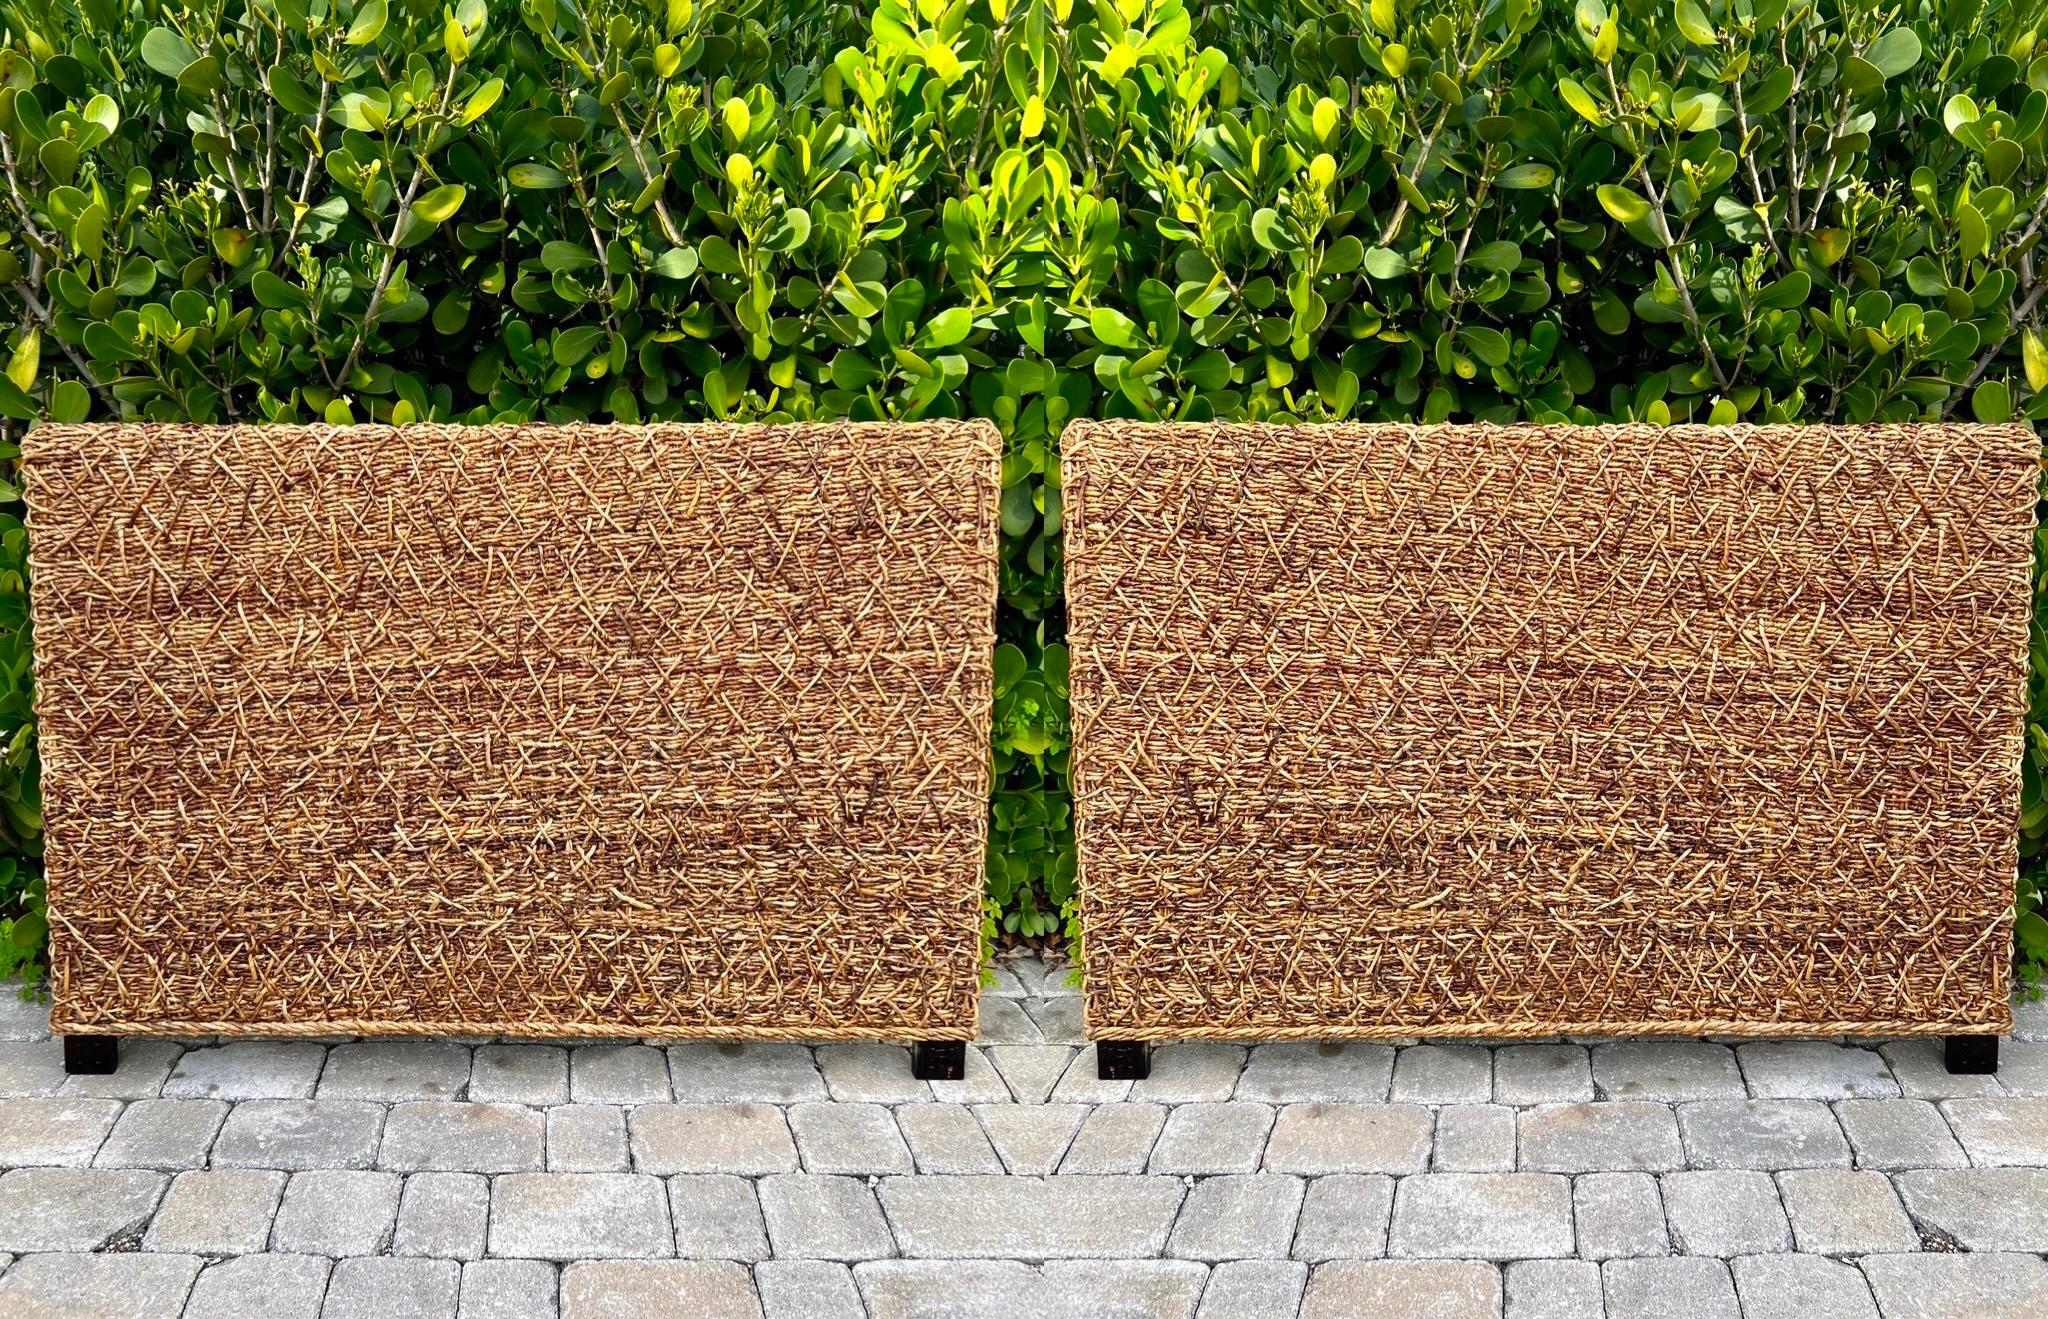 Pair of Artisan-made headboards in natural abaca fibers, expertly hand-woven over ebonized wood frames. Full size headboards feature woven patterns with organic textures for the perfectly stylized Organic Modern or Coastal bedroom design.